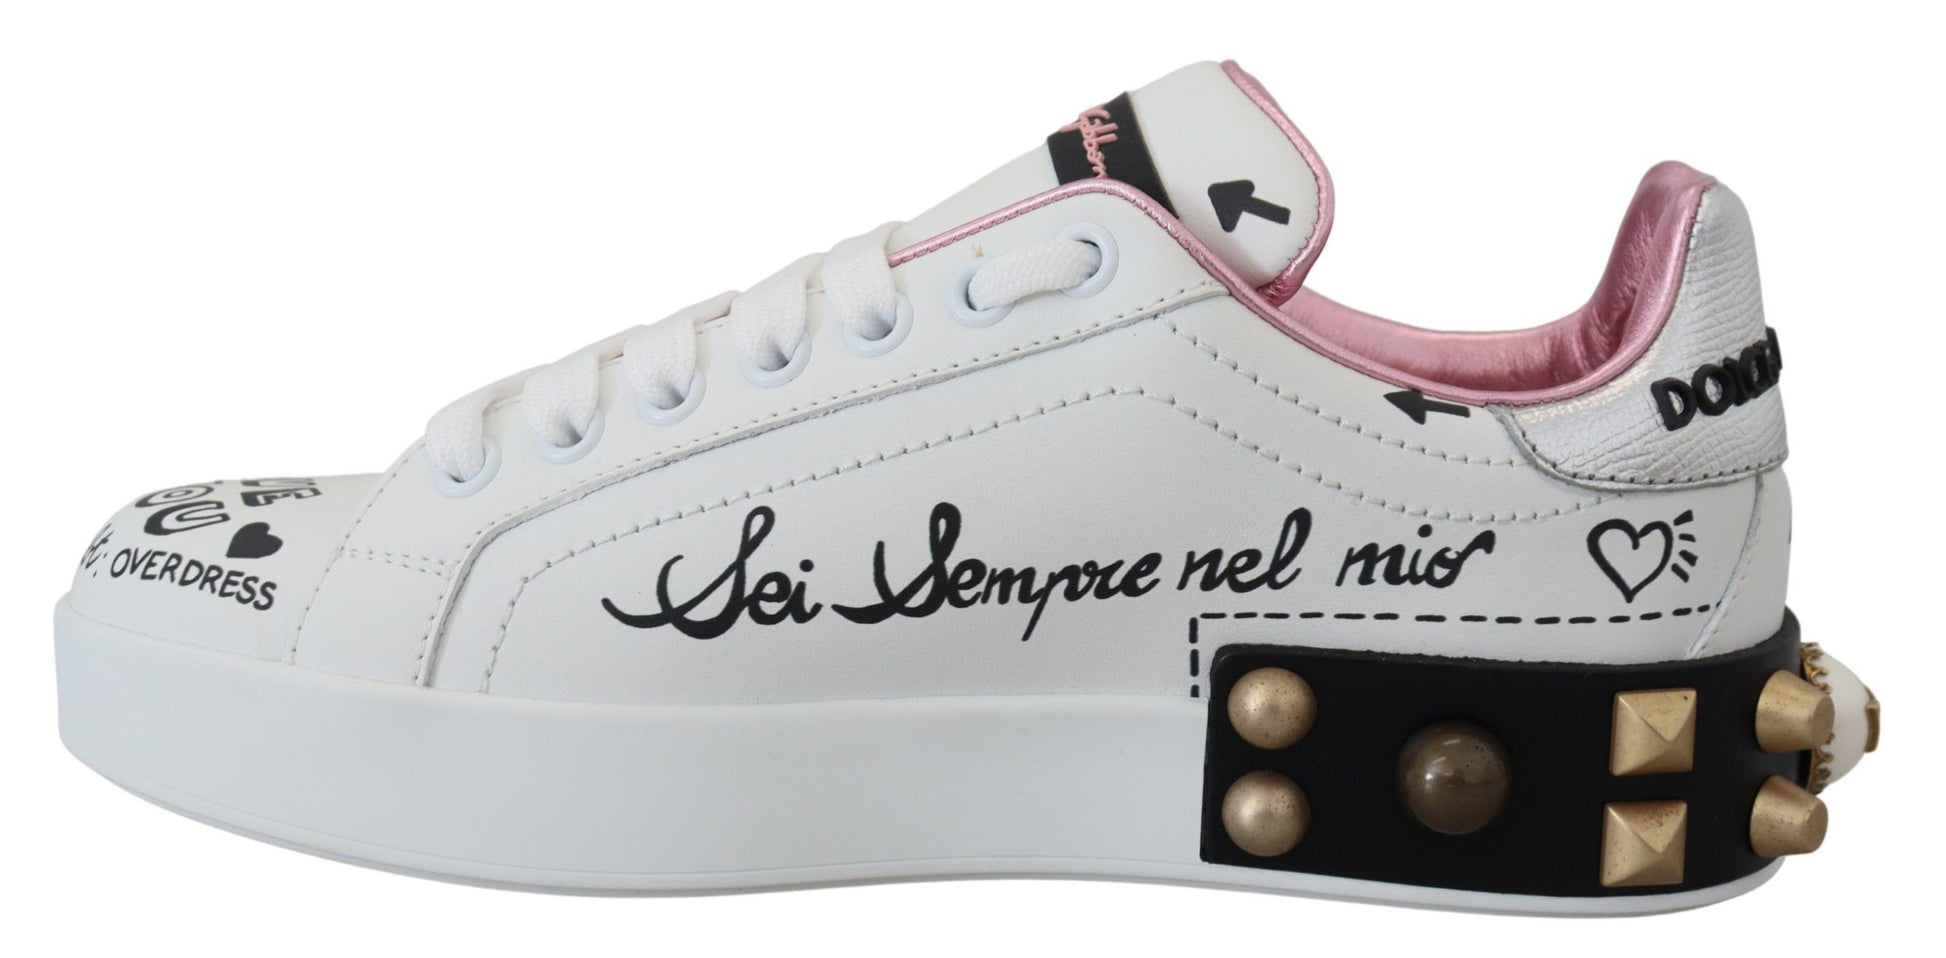 Dolce & Gabbana Queen Crown Chic Leather Sneakers